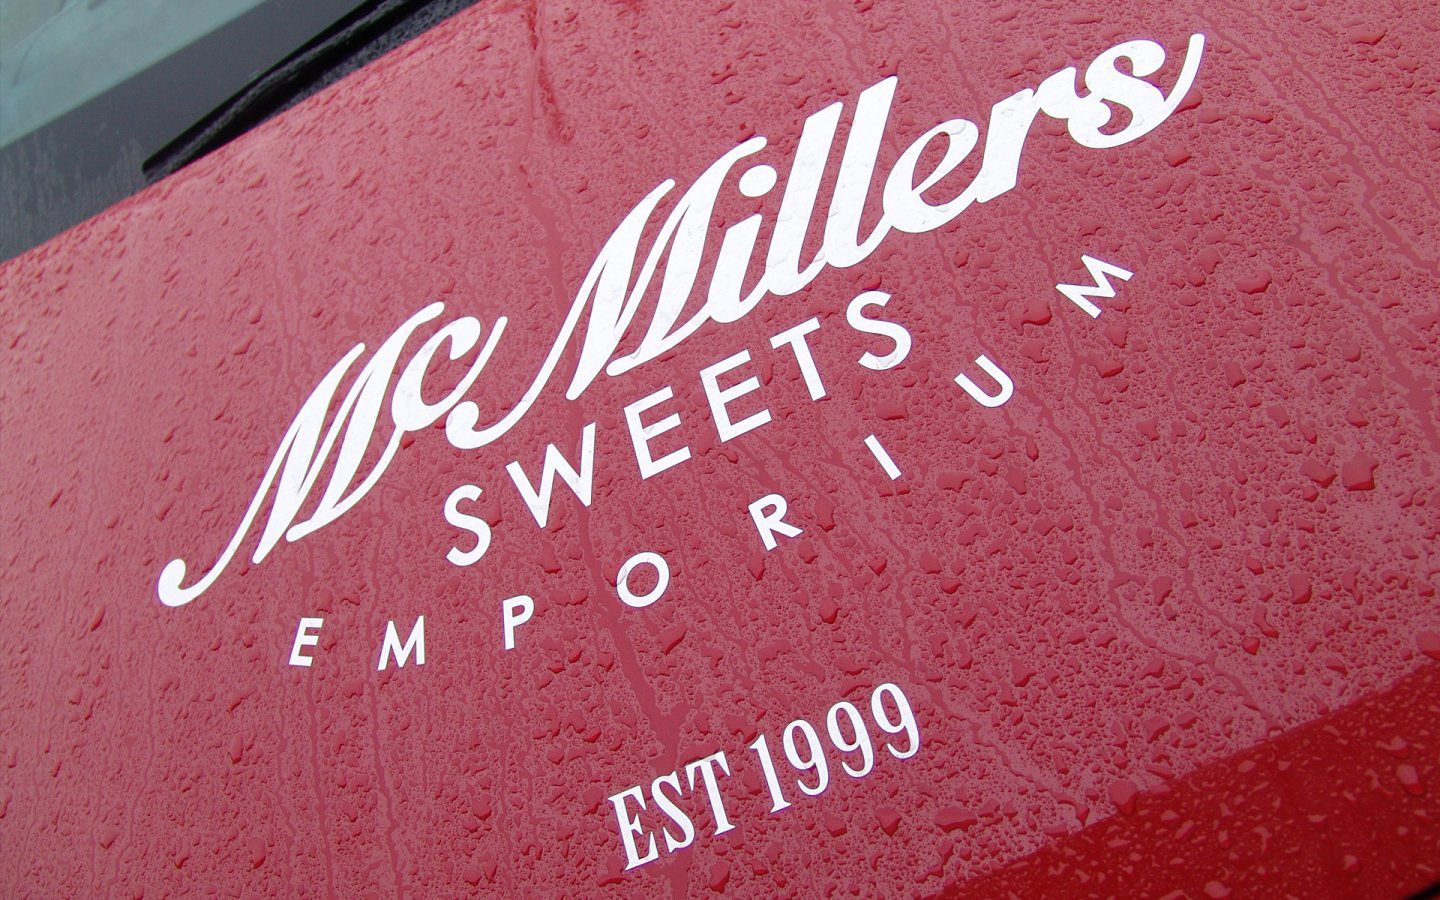 McMillers Sweets Emporium Logo Design Mono Simplified on Car